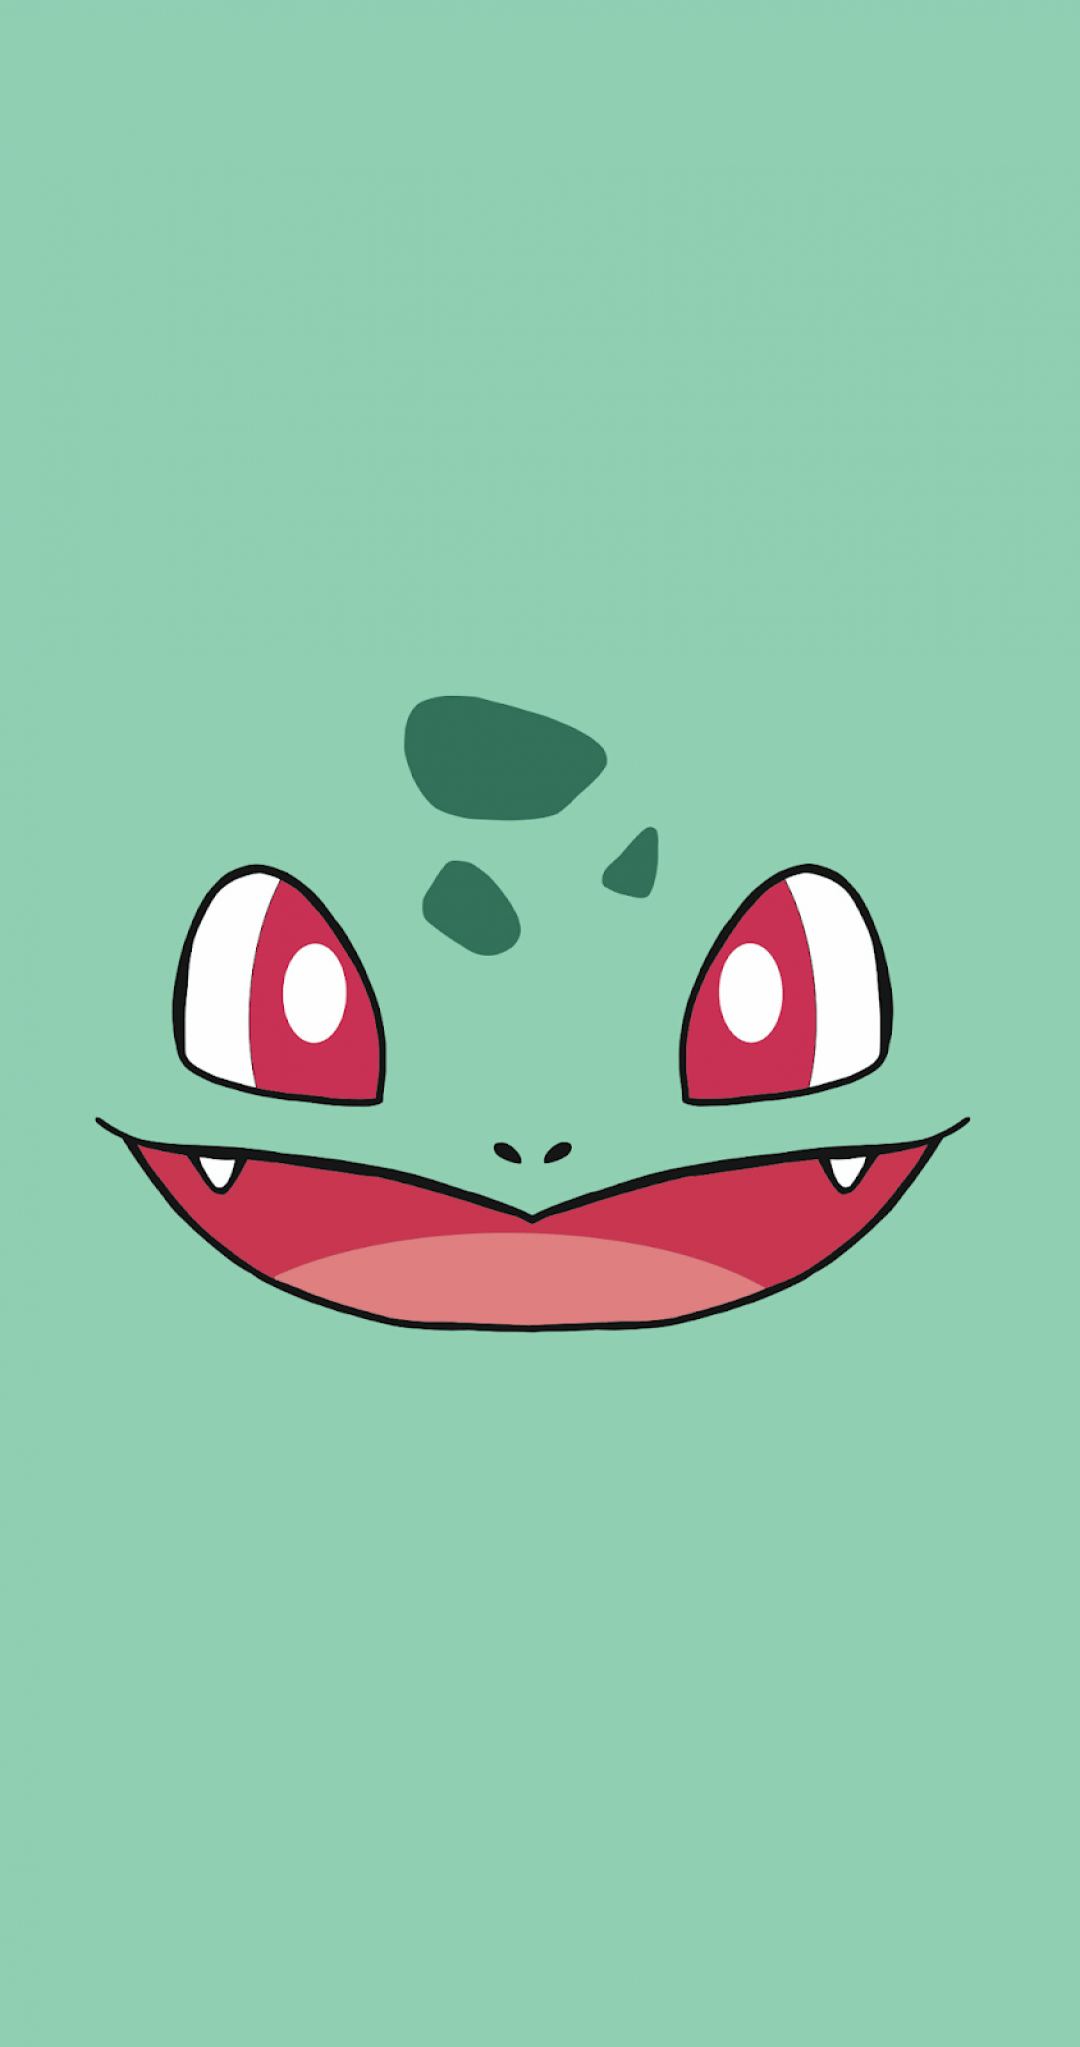 IPhone wallpaper with a picture of a cute green bulbasaur from Pokemon - Pikachu, Pokemon